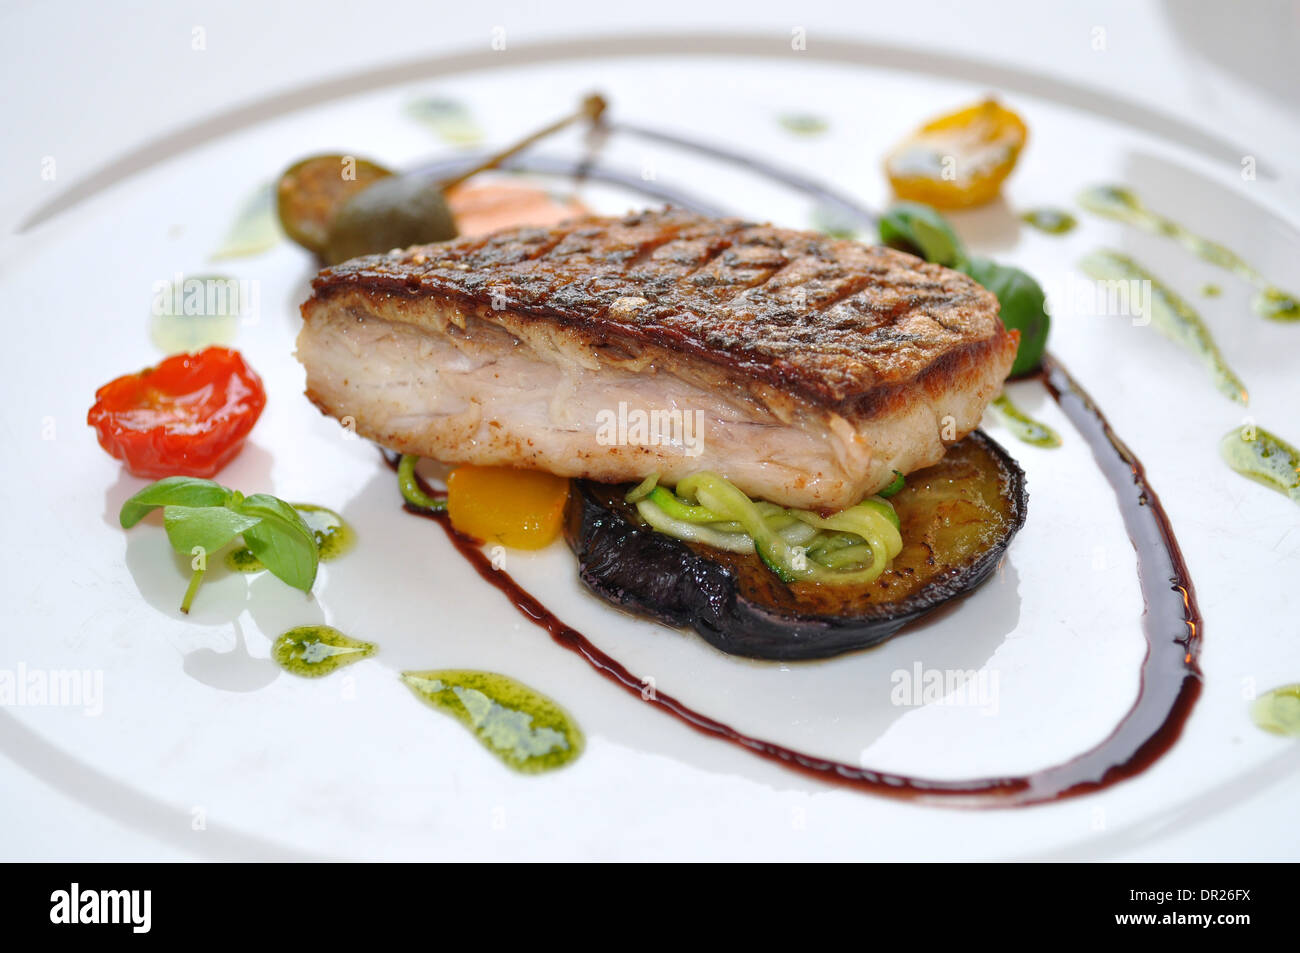 Steamed stone bass with aubergine, courgette, peppers, black olive oil & pesto served at Coq d'Argent, fine French dining London Stock Photo